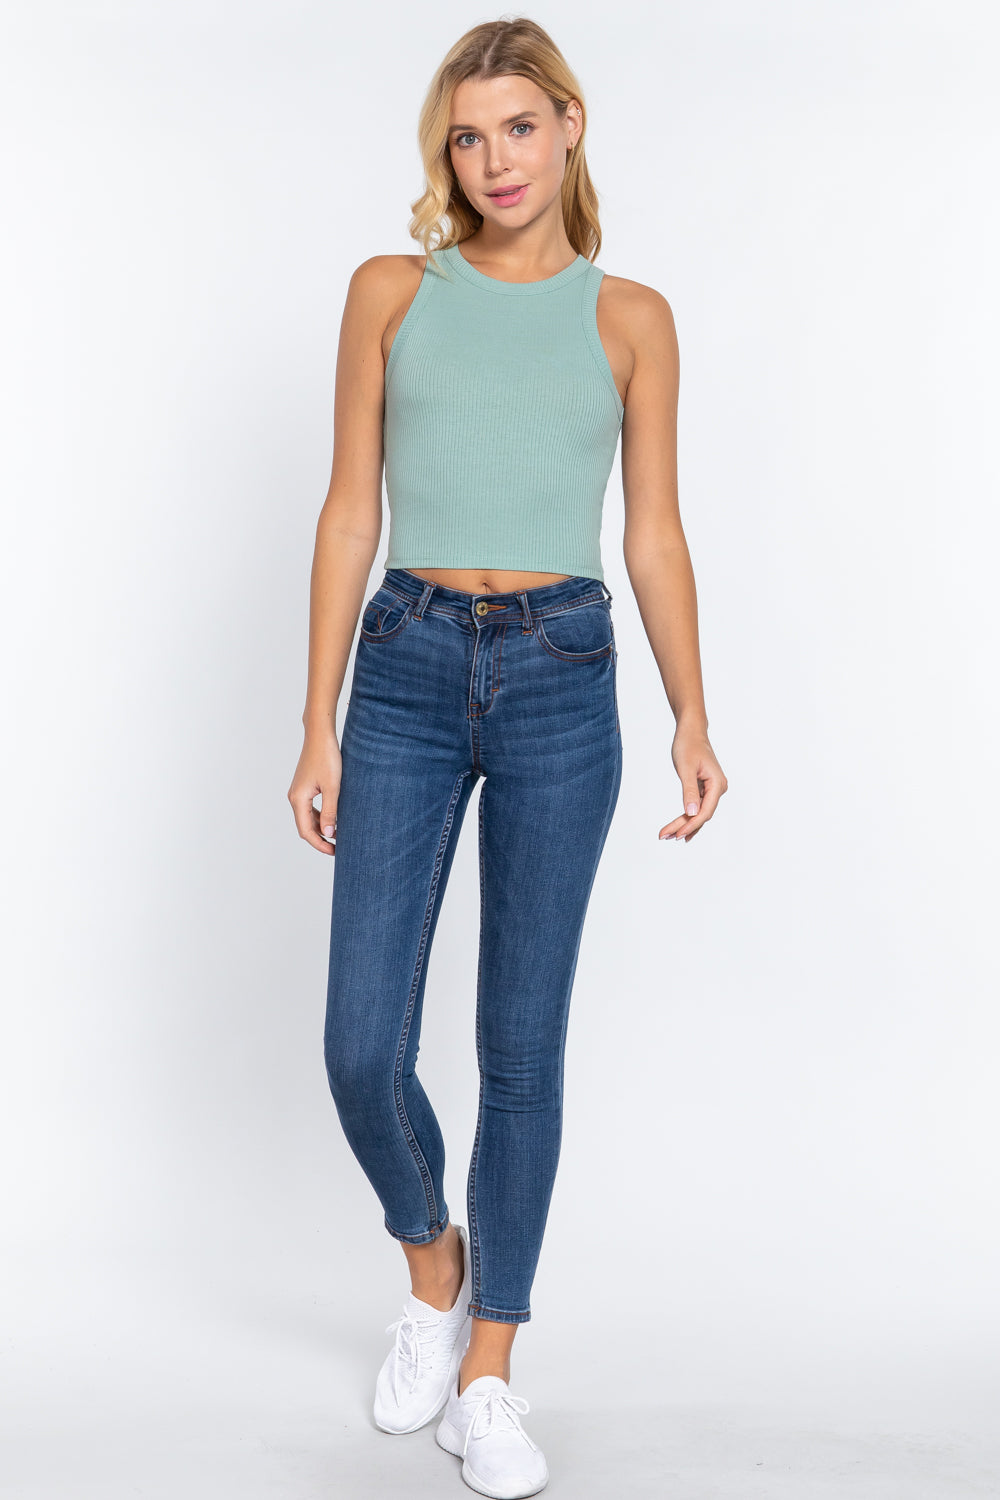 Mint - Summer Fashion Ribbed Halter Neck Crop Top - womens crop top at TFC&H Co.